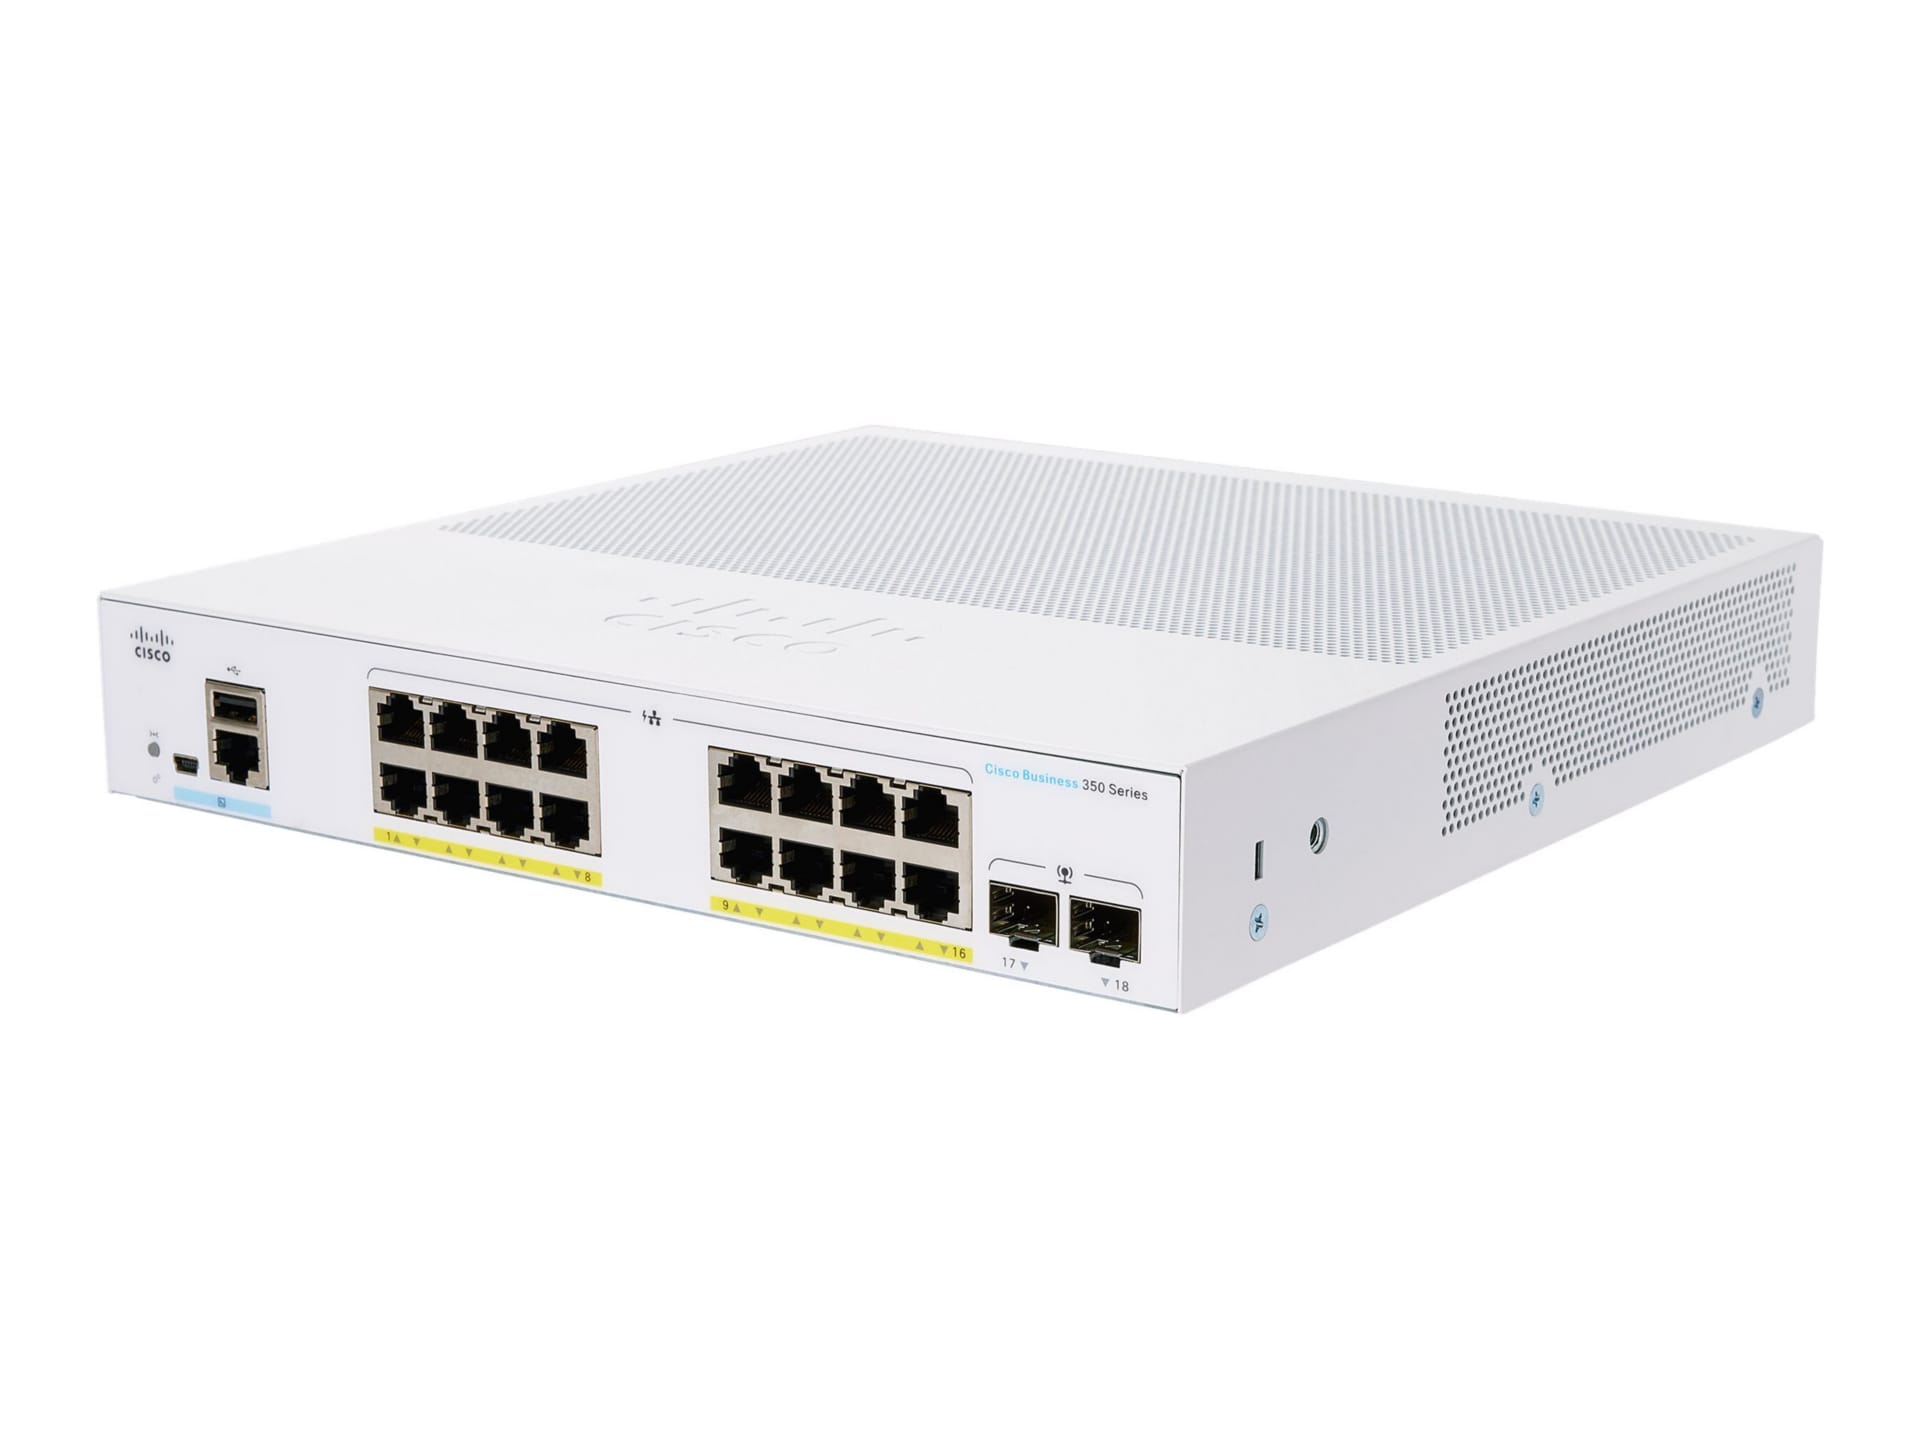 Buy Enterprise Switching - [CBS350-16P-2G-IN] Cisco SG350-16 16 port Gigabit  PoE Switch - 16 x 10/100/1000 ports PoE+ ports with 120W power budget - 2  Gigabit SFP Online in Hyderabad, India - Metapoint